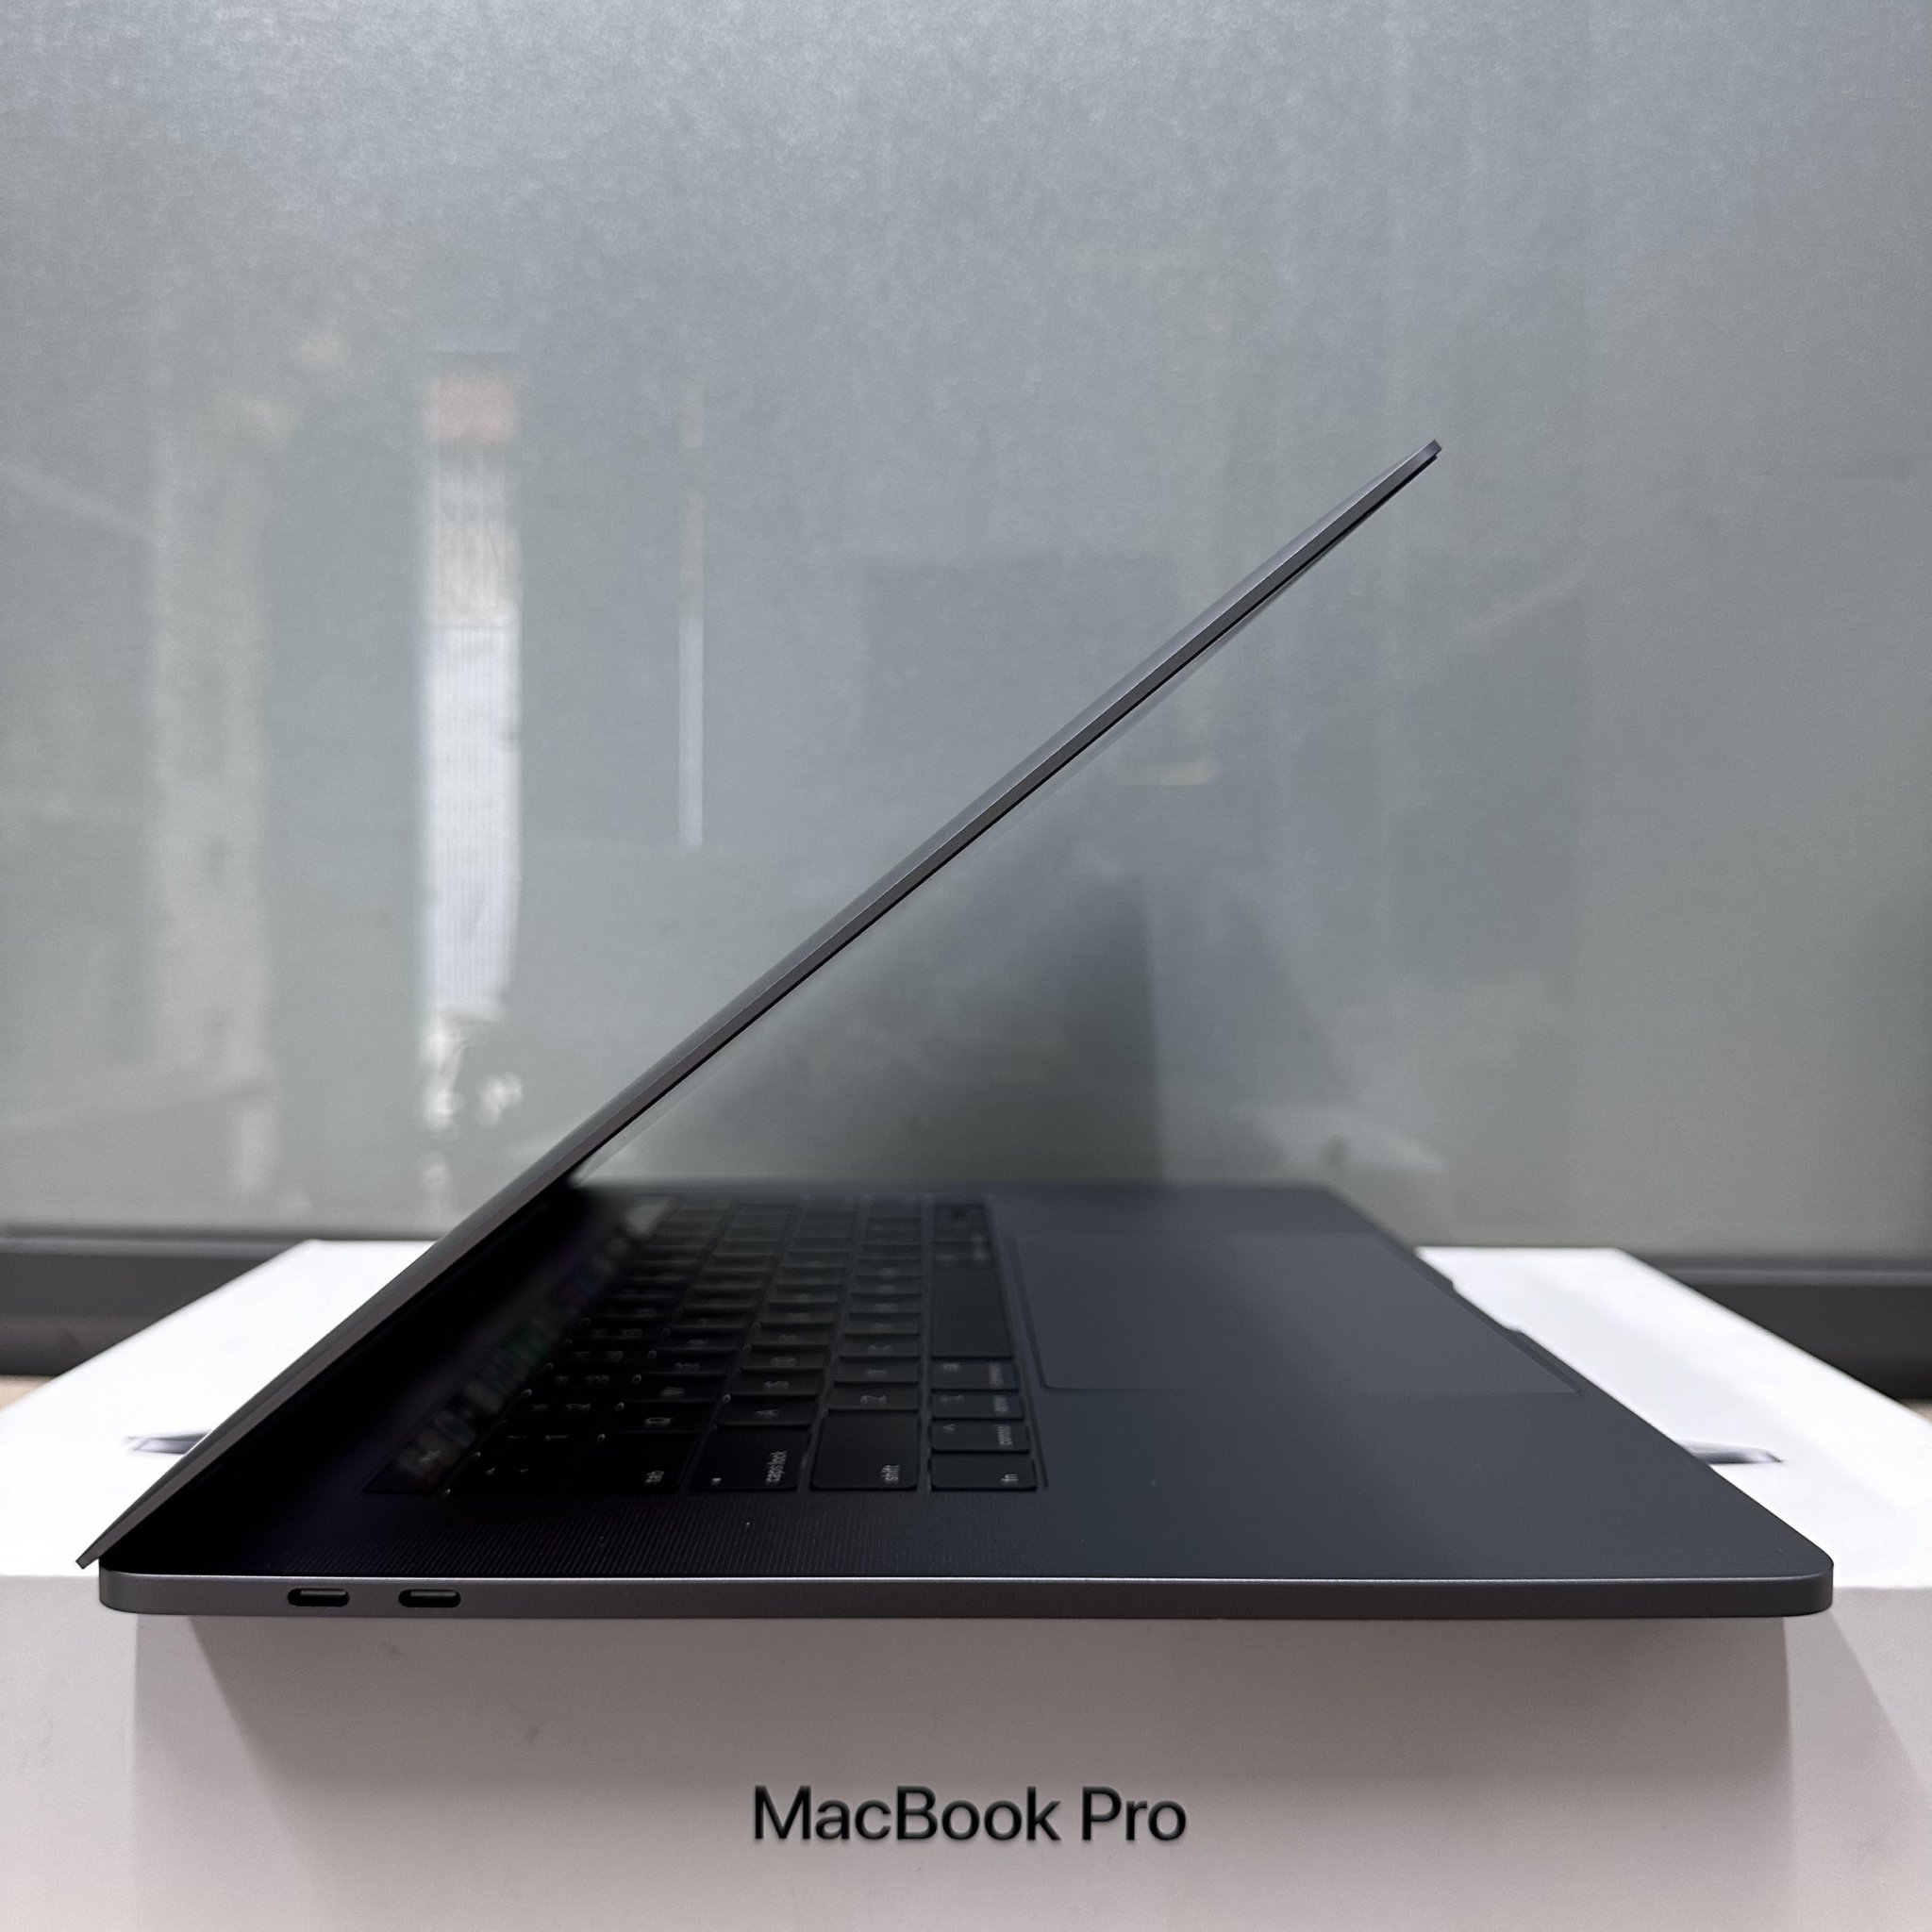 Macbook Pro (15-inch, 2019) i9/Ram 16G/SSD 512G (Touch Bar,Touch ID) mới FULL BOX 20295259_macbook-pro-2019-i9-full-box_1